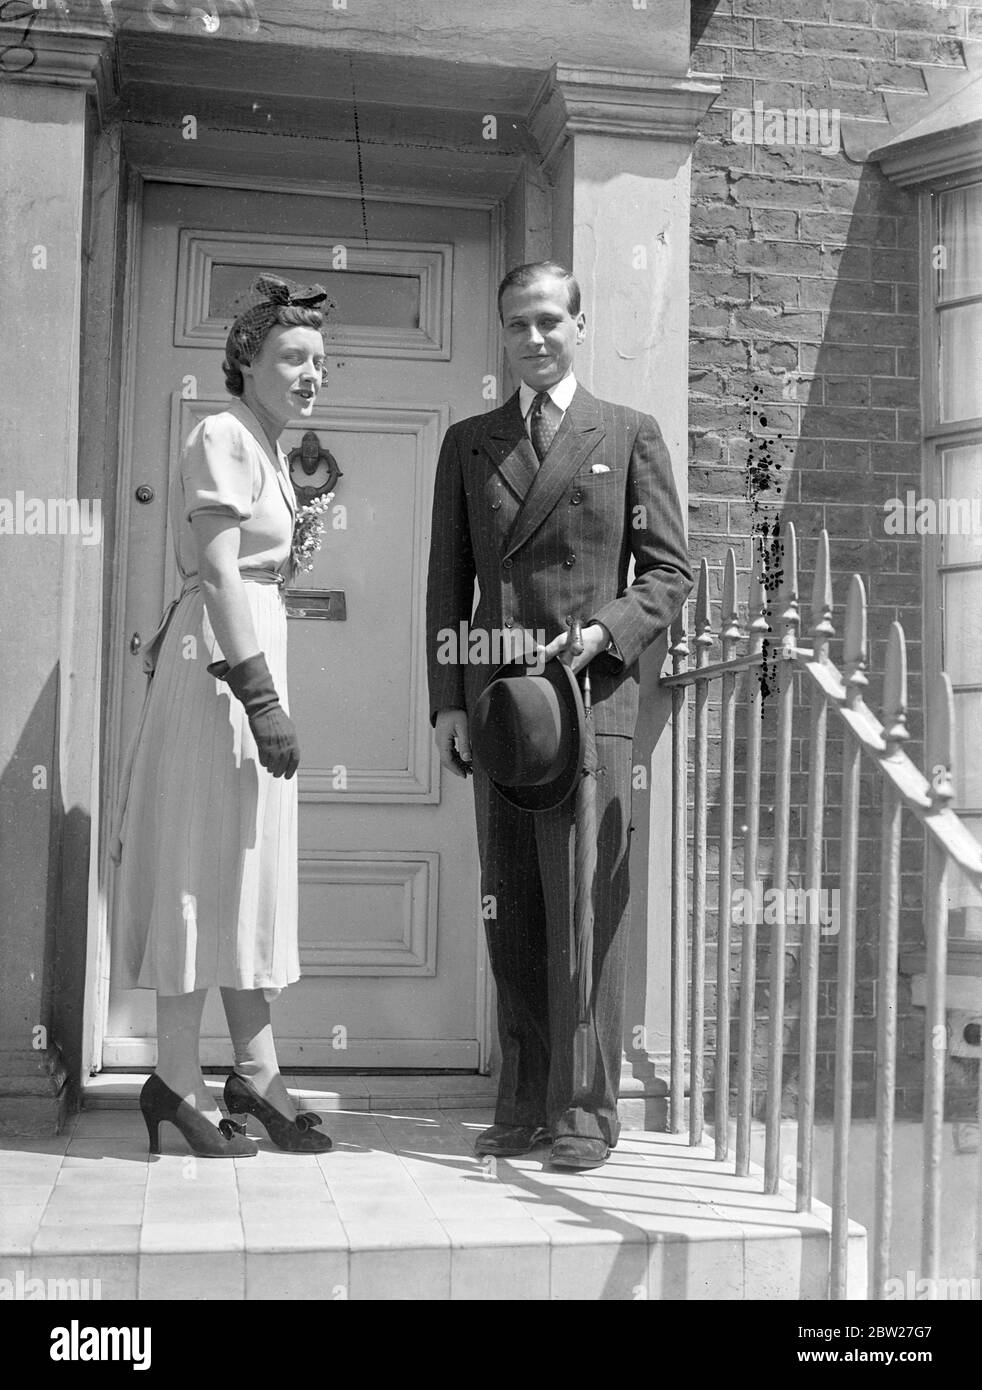 Miss Margaret Campbell with her fiance, Prince Ludwig of Hessen after the announcement of their engagement. She is the daughter of a former British Ambassador to America, Sir Auckland Geddes, and niece to the late Sir Eric Geddes, originator of the post-war economy measures known as the Geddes Axe. He is the second son of the Grand Duke of Hessen and a great grandson of Queen Victoria. 16 July 1937. Stock Photo